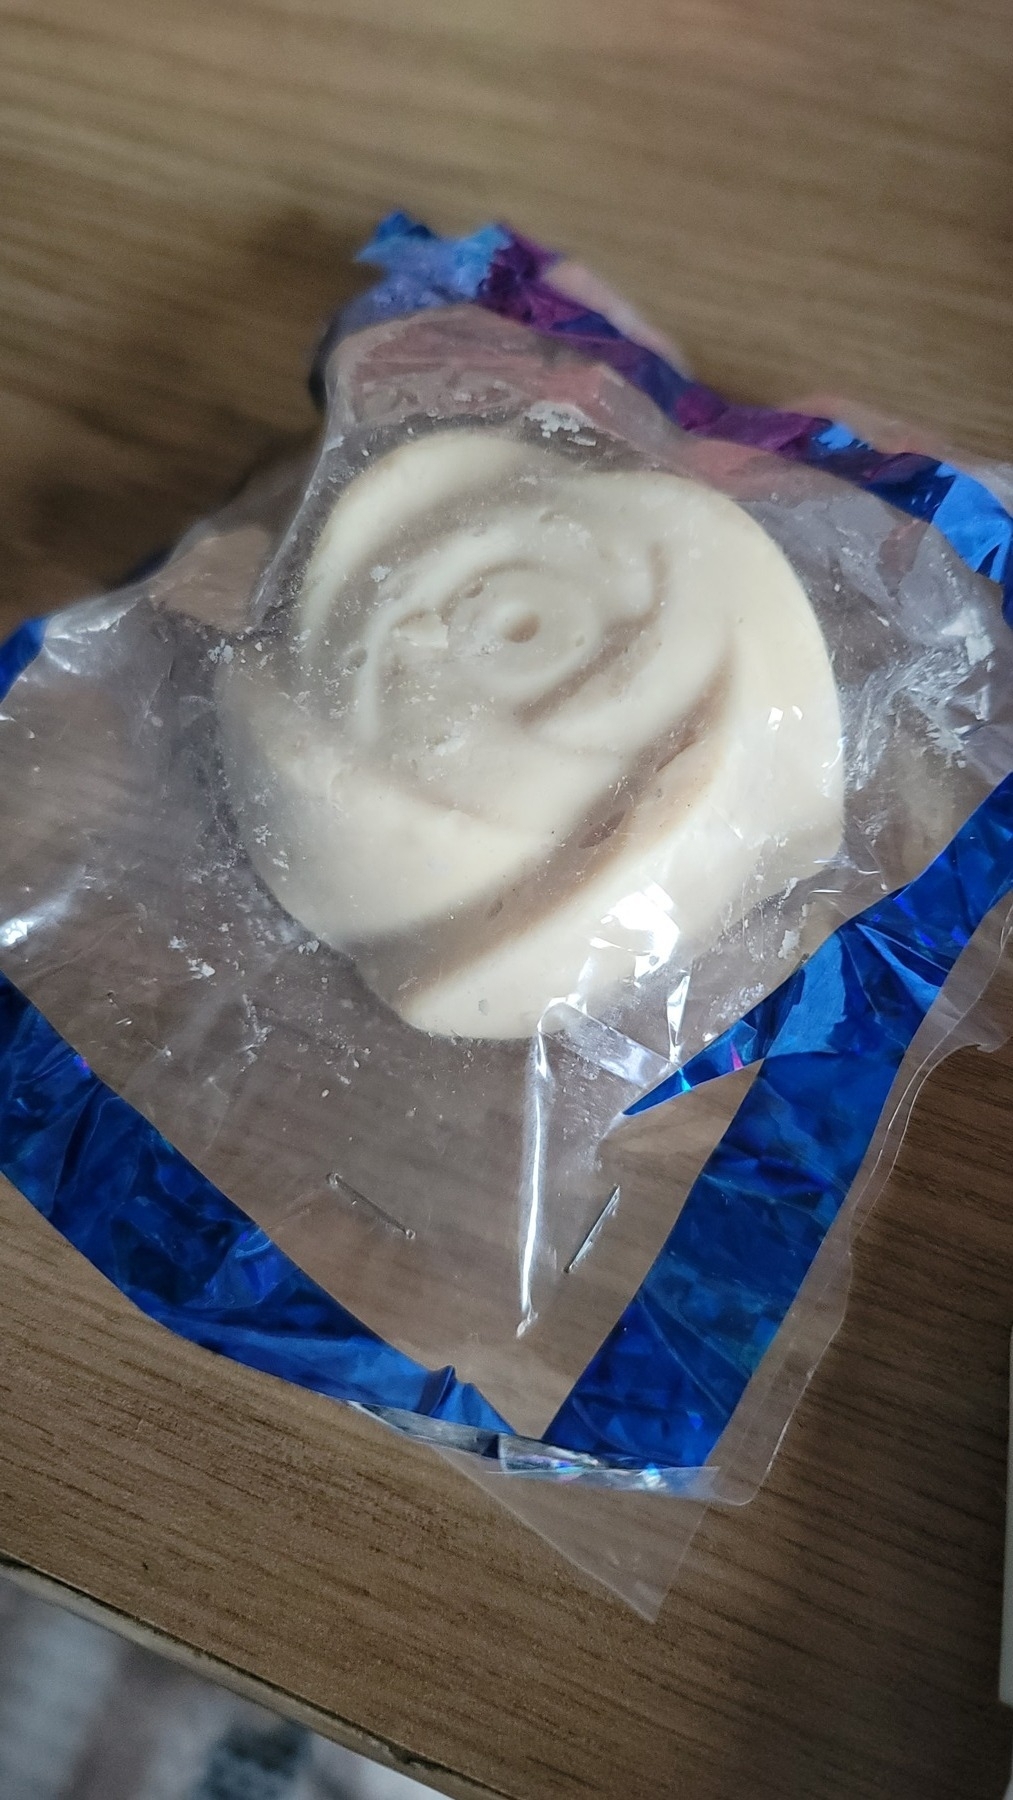 off-white circular bar of soap carved to look like a flower